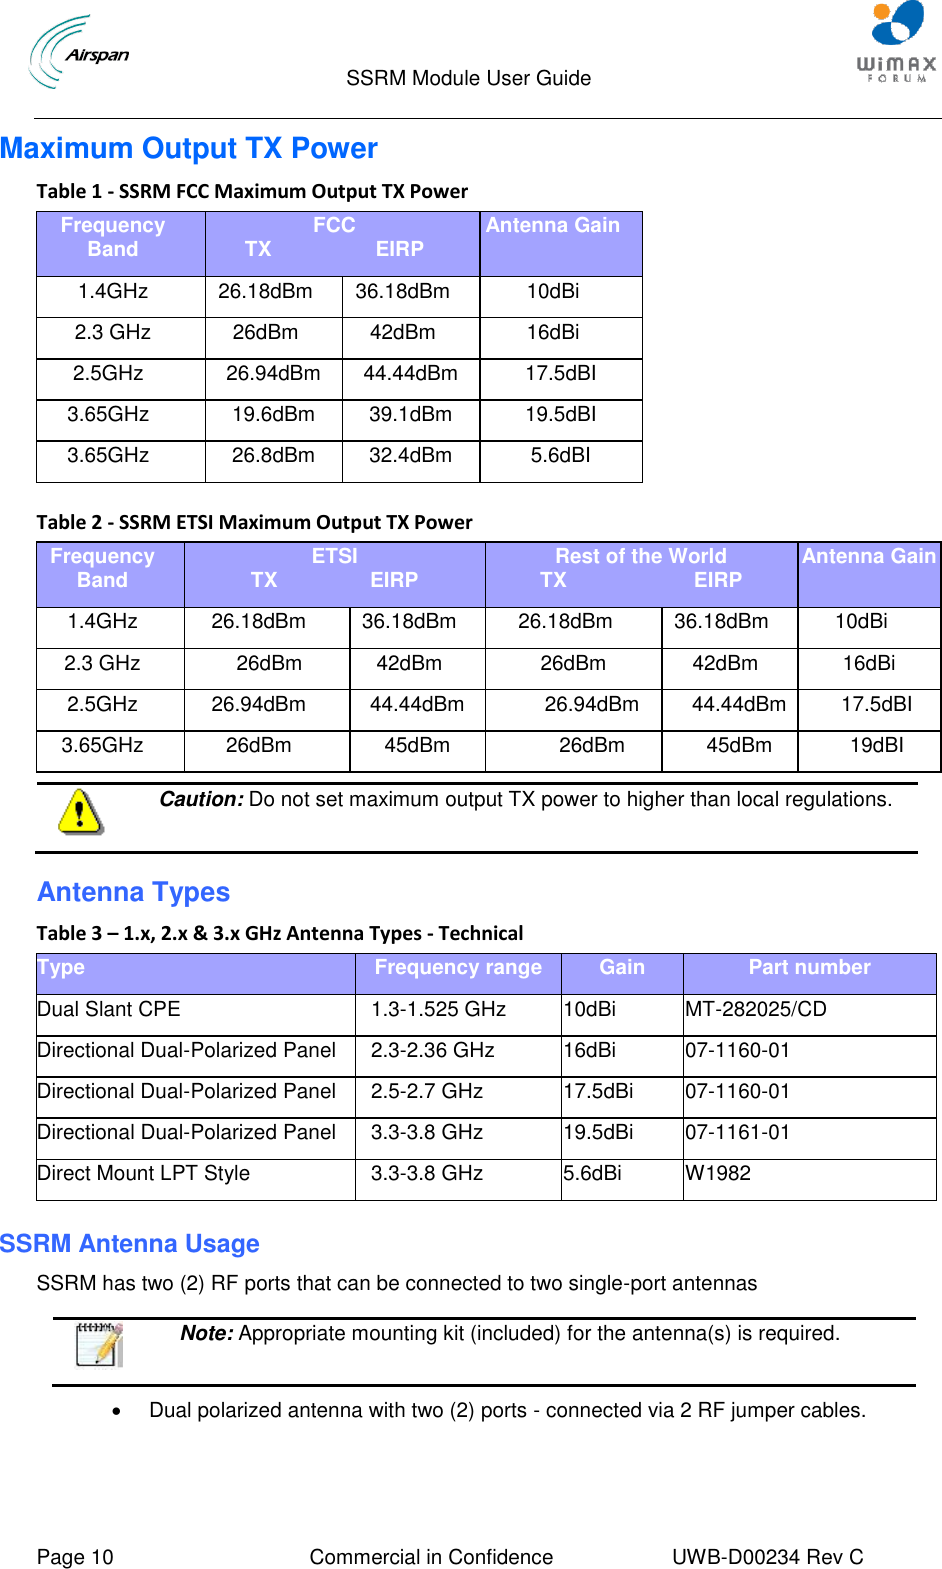                                  SSRM Module User Guide     Page 10  Commercial in Confidence  UWB-D00234 Rev C    Maximum Output TX Power Table 1 - SSRM FCC Maximum Output TX Power Frequency Band FCC TX                  EIRP Antenna Gain 1.4GHz 26.18dBm 36.18dBm 10dBi 2.3 GHz 26dBm 42dBm 16dBi 2.5GHz 26.94dBm 44.44dBm 17.5dBI 3.65GHz 19.6dBm 39.1dBm 19.5dBI 3.65GHz 26.8dBm 32.4dBm 5.6dBI   Table 2 - SSRM ETSI Maximum Output TX Power Frequency Band ETSI TX                EIRP Rest of the World TX                      EIRP Antenna Gain 1.4GHz 26.18dBm 36.18dBm 26.18dBm 36.18dBm 10dBi 2.3 GHz 26dBm 42dBm 26dBm 42dBm 16dBi 2.5GHz 26.94dBm 44.44dBm 26.94dBm 44.44dBm 17.5dBI 3.65GHz 26dBm 45dBm 26dBm 45dBm 19dBI   Caution: Do not set maximum output TX power to higher than local regulations.  Antenna Types Table 3 – 1.x, 2.x &amp; 3.x GHz Antenna Types - Technical Type Frequency range Gain Part number Dual Slant CPE  1.3-1.525 GHz 10dBi MT-282025/CD Directional Dual-Polarized Panel  2.3-2.36 GHz 16dBi 07-1160-01 Directional Dual-Polarized Panel  2.5-2.7 GHz 17.5dBi 07-1160-01 Directional Dual-Polarized Panel 3.3-3.8 GHz 19.5dBi 07-1161-01 Direct Mount LPT Style  3.3-3.8 GHz 5.6dBi W1982  SSRM Antenna Usage SSRM has two (2) RF ports that can be connected to two single-port antennas    Note: Appropriate mounting kit (included) for the antenna(s) is required.    Dual polarized antenna with two (2) ports - connected via 2 RF jumper cables.  